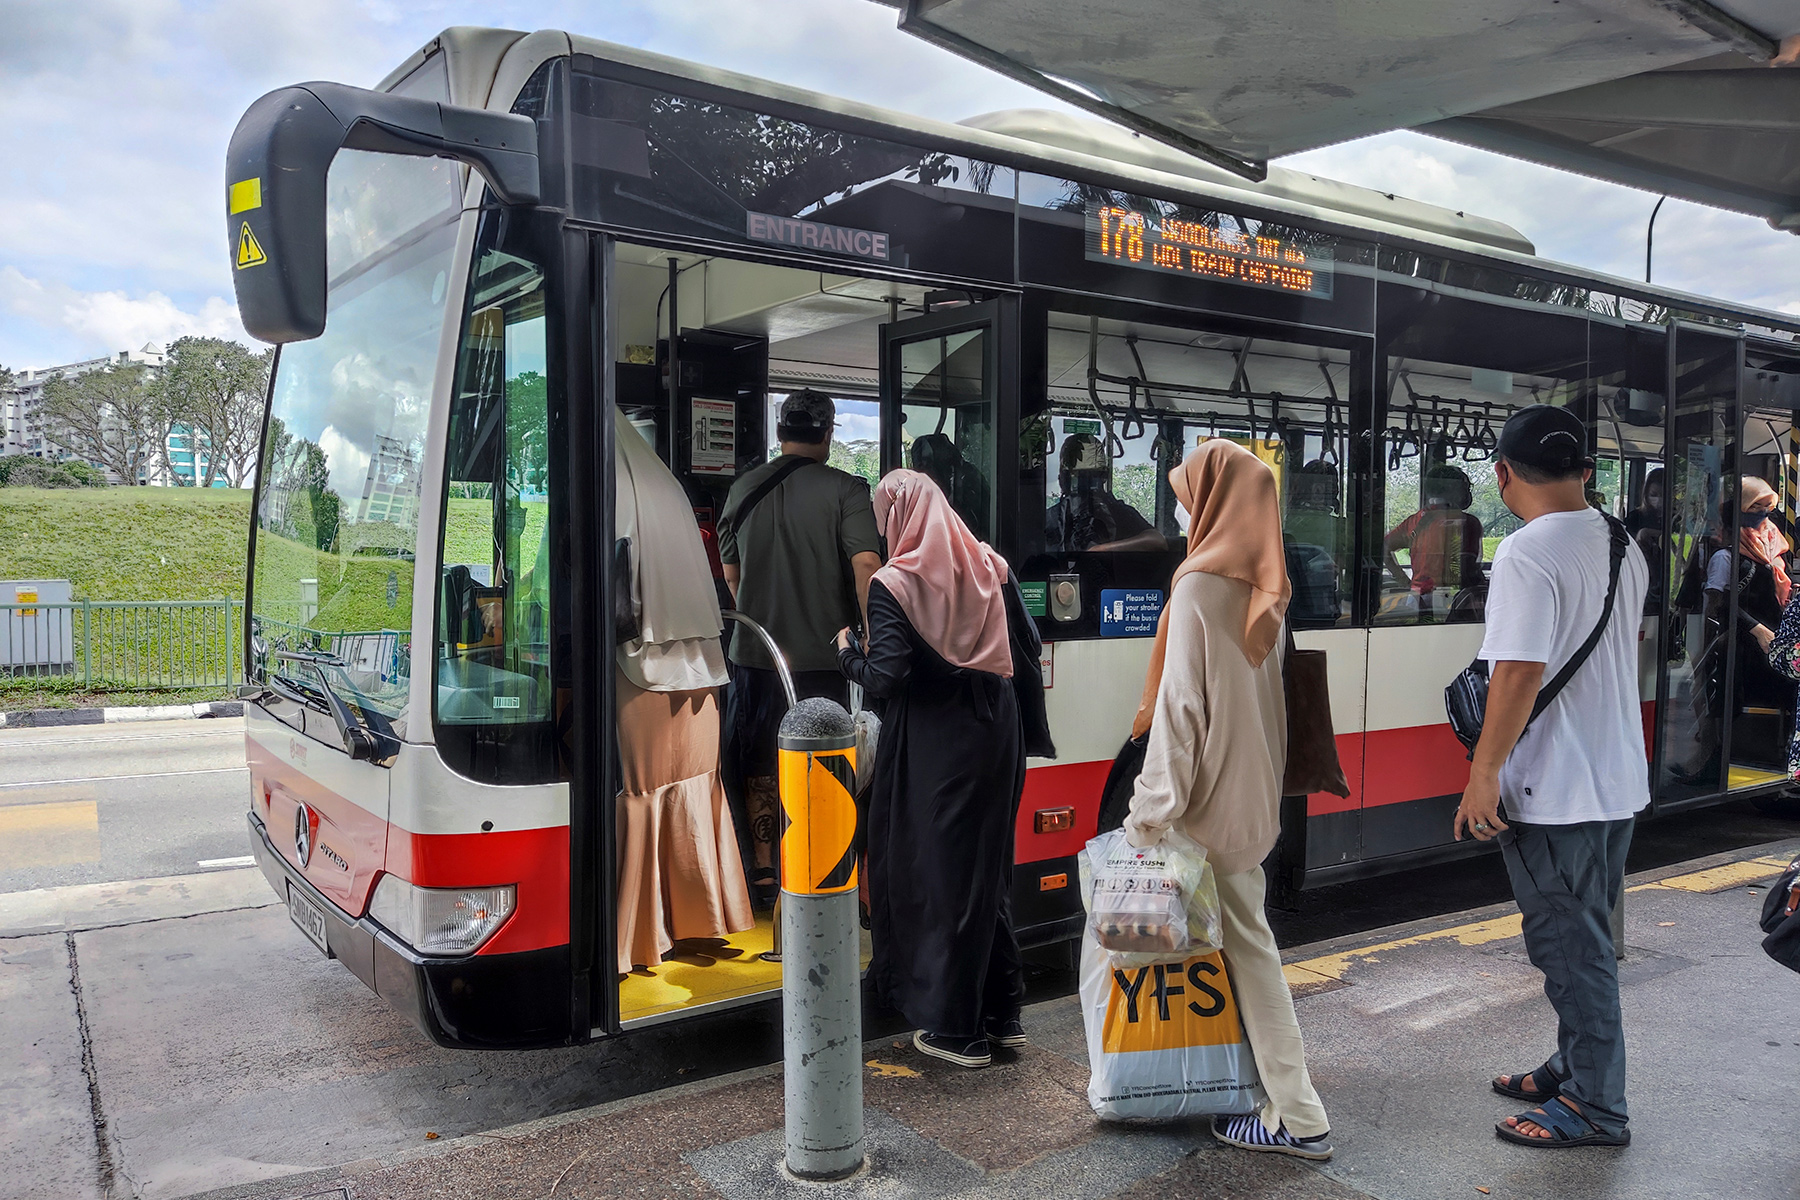 People getting onto a bus in Singapore